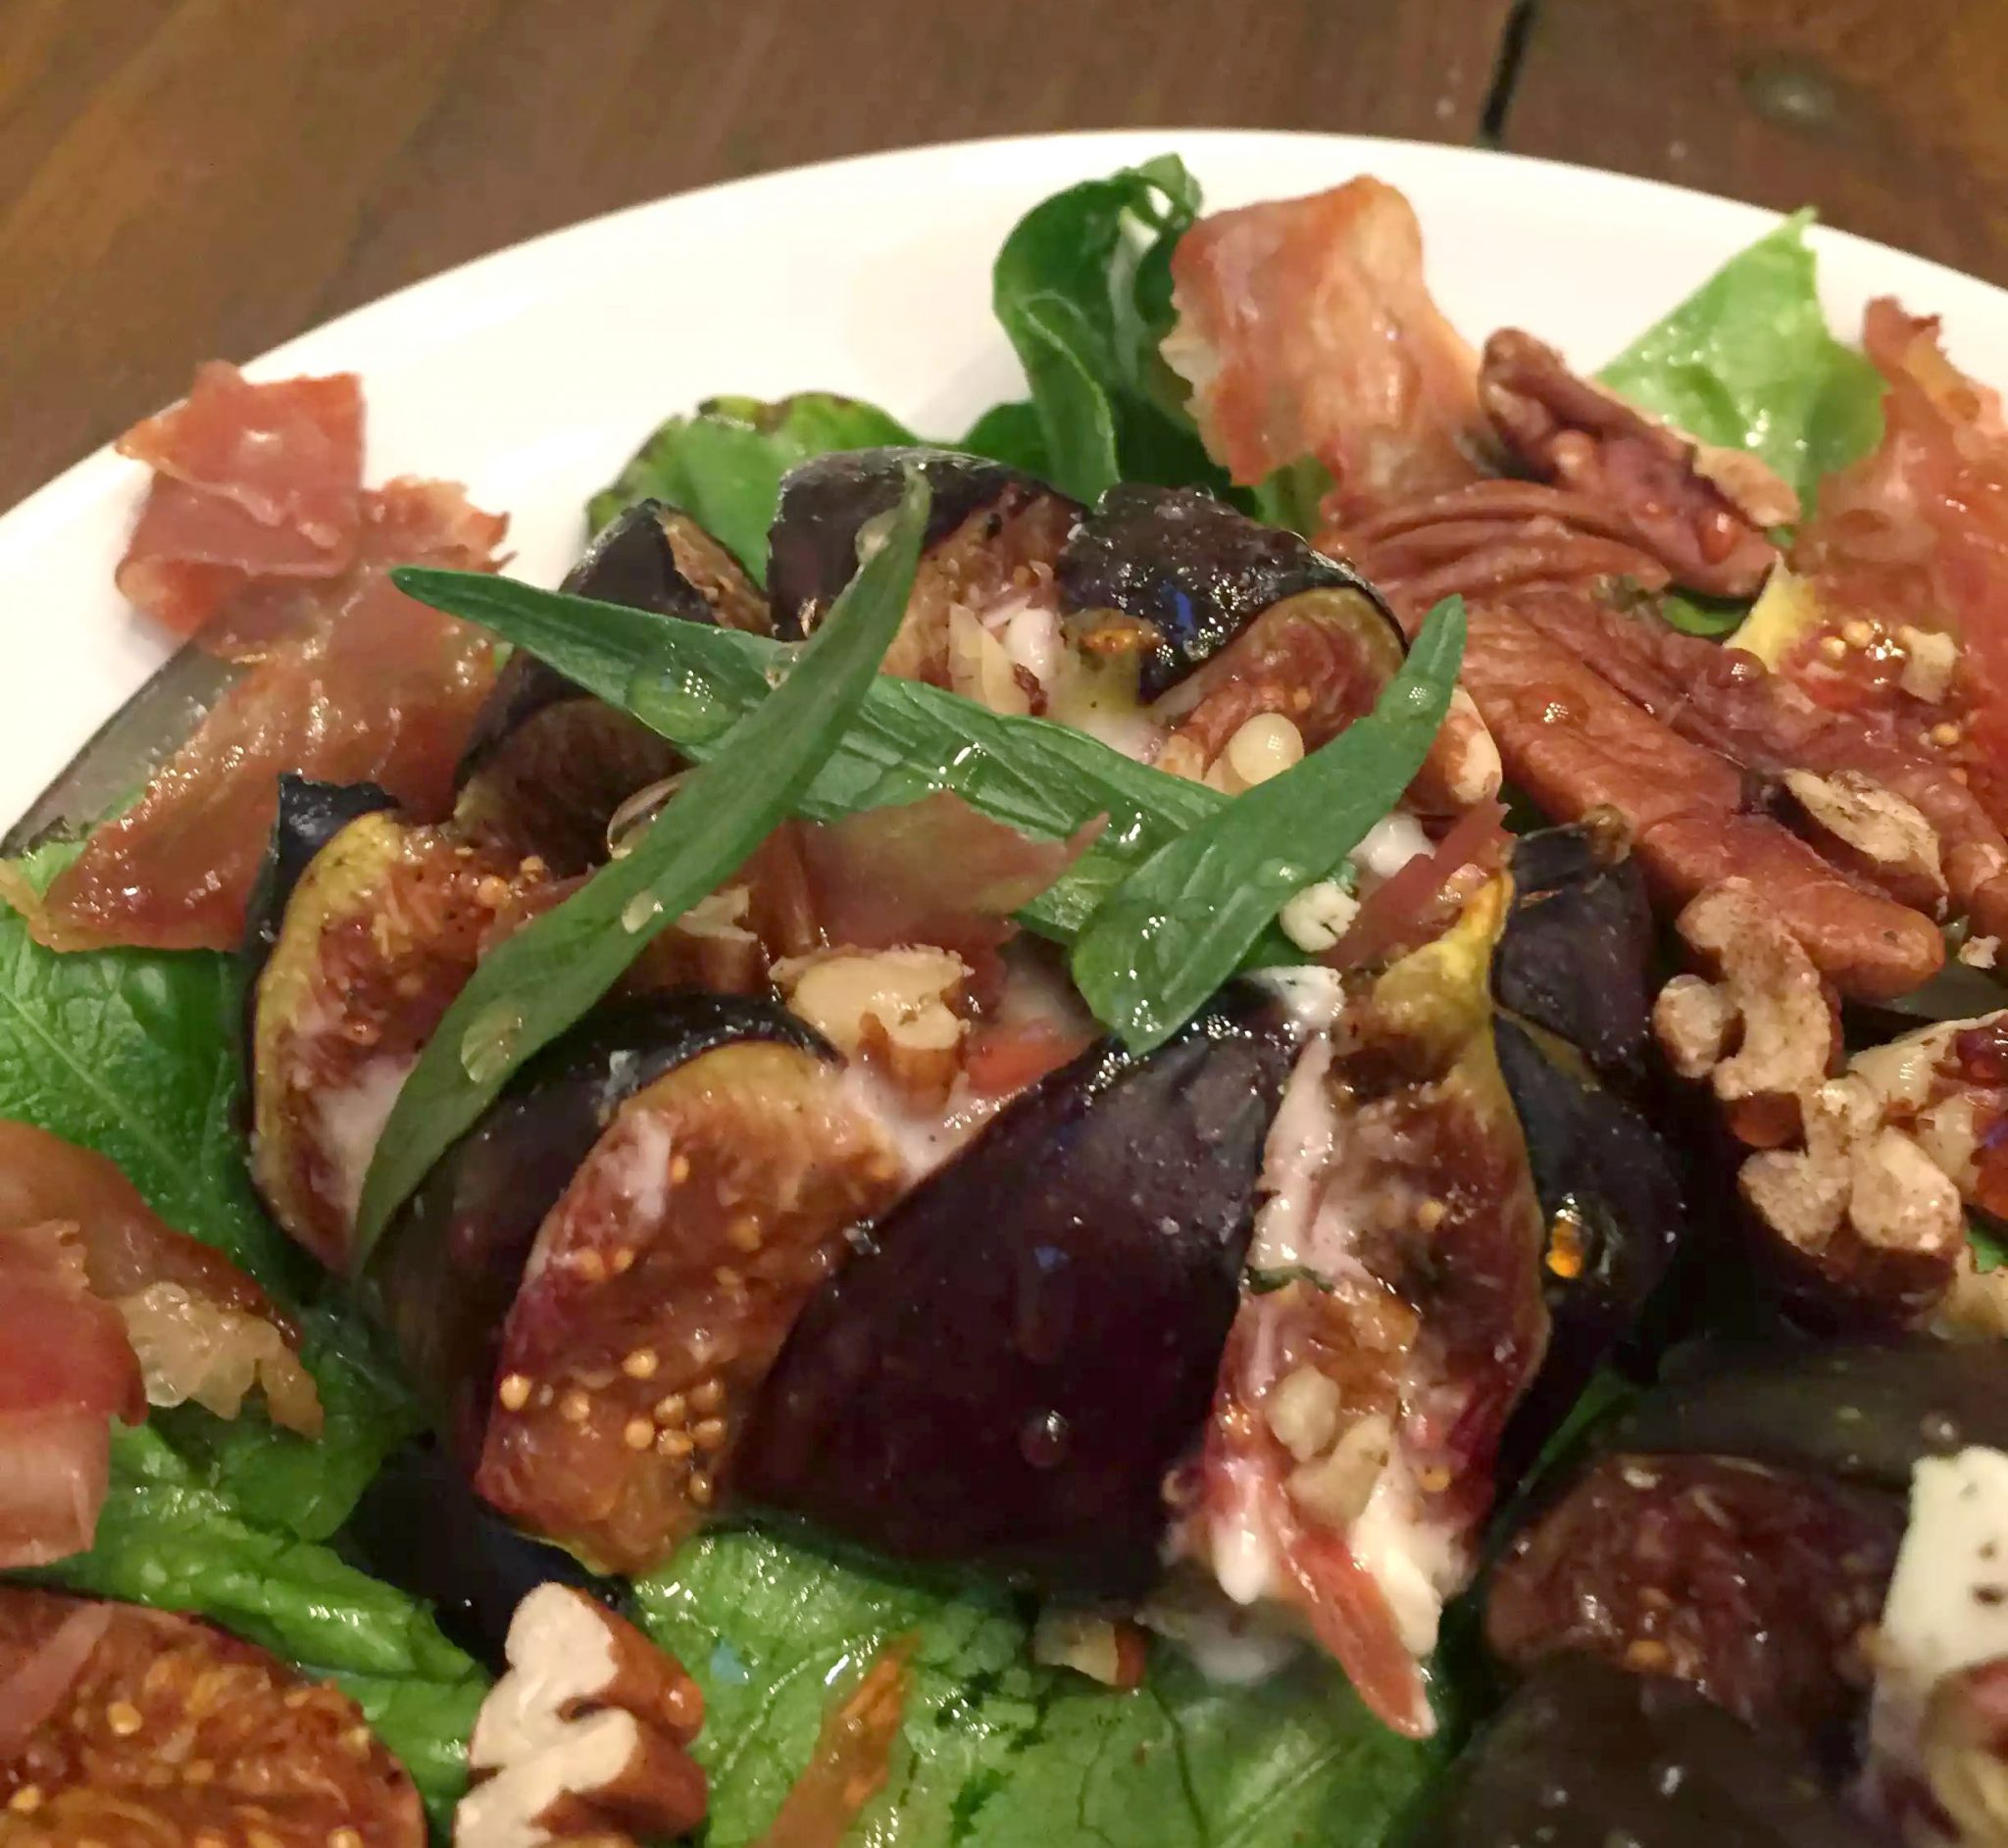 Roasted Fig and Brie Salad with Crispy Prosciutto, Grapes & Tarragon